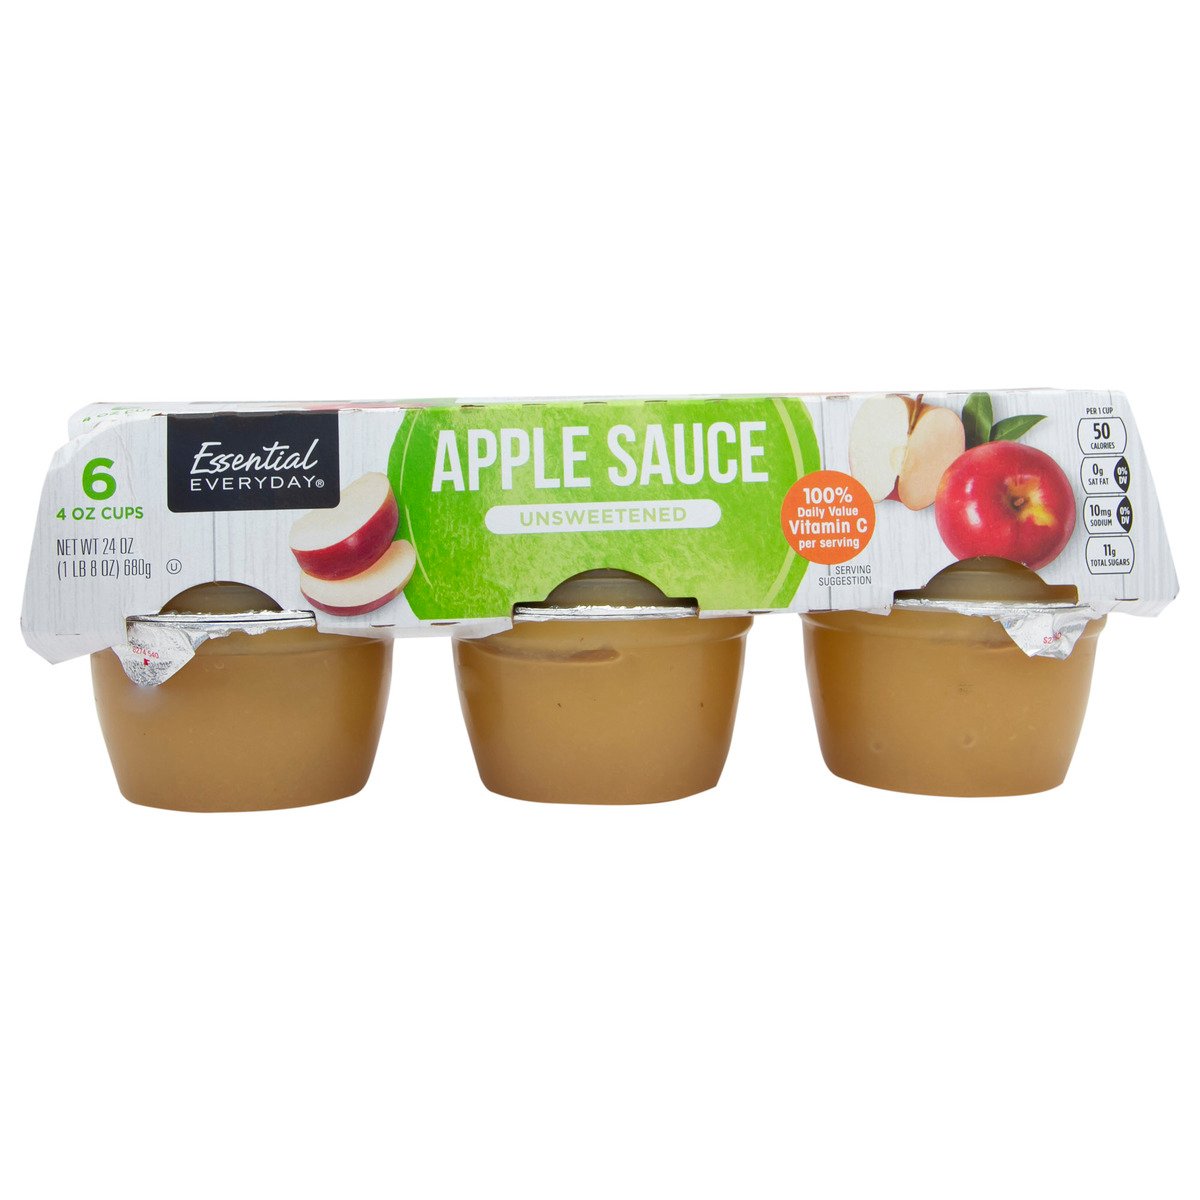 Essential Everyday Unsweetened Apple Sauce 680 g